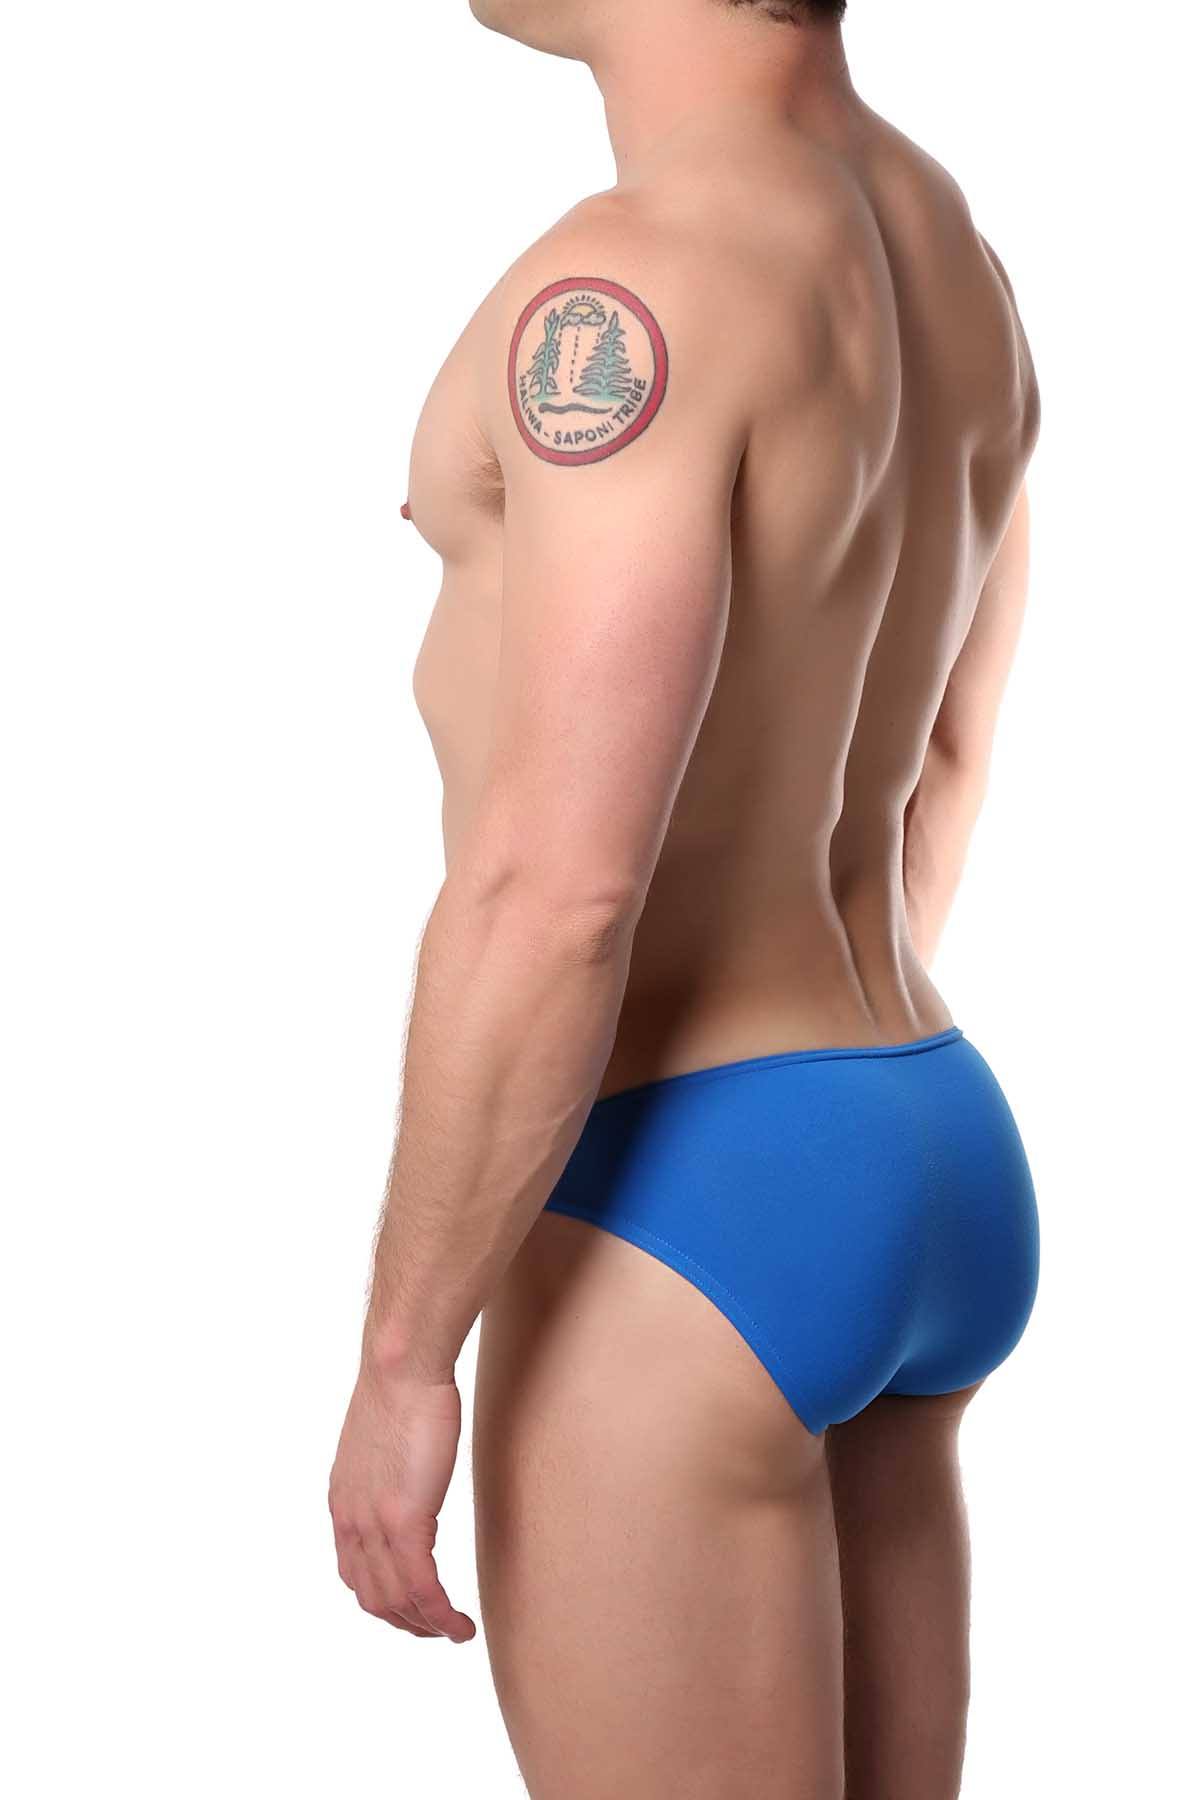 Cocksox Skydiver-Blue Enhancing Pouch Brief